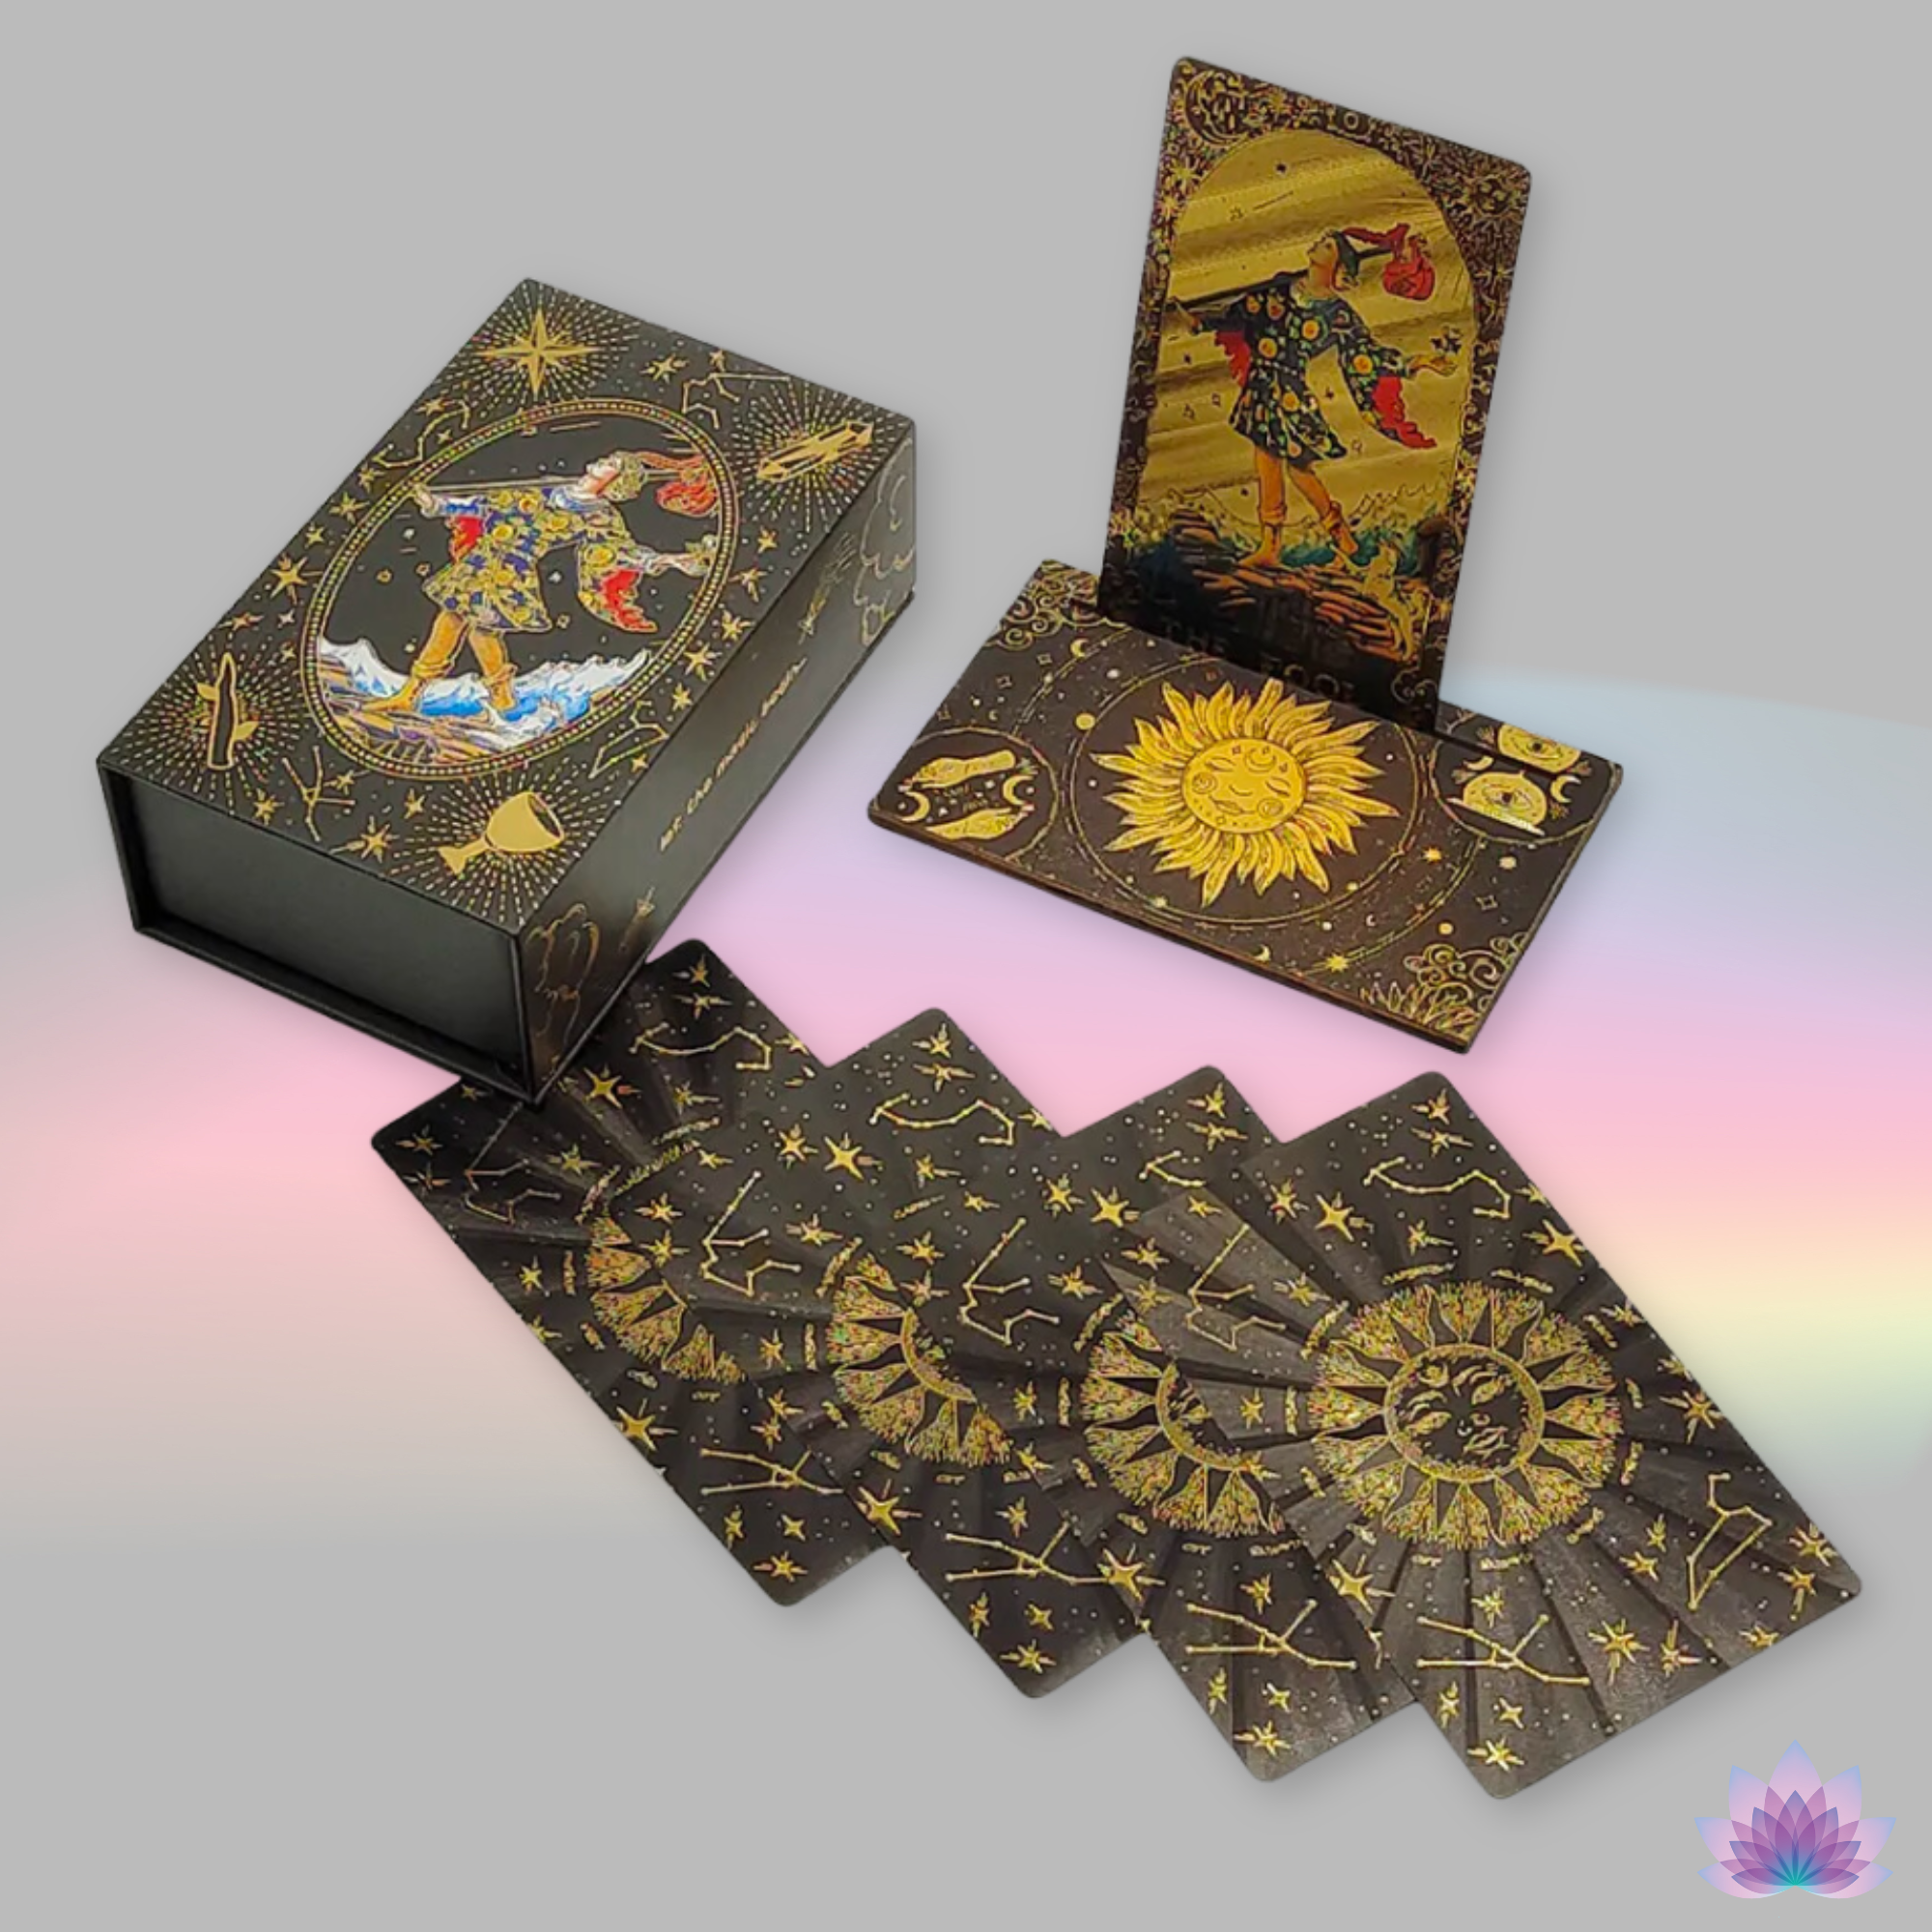 Gold Foil Tarot Deck On A Luxury Box With Wooden Card Stand And Guidebook For Beginner Divination Witch • Traditional Waite Premium Colored PVC Cards With Black Background And Gold Lines • Apollo Tarot Shop